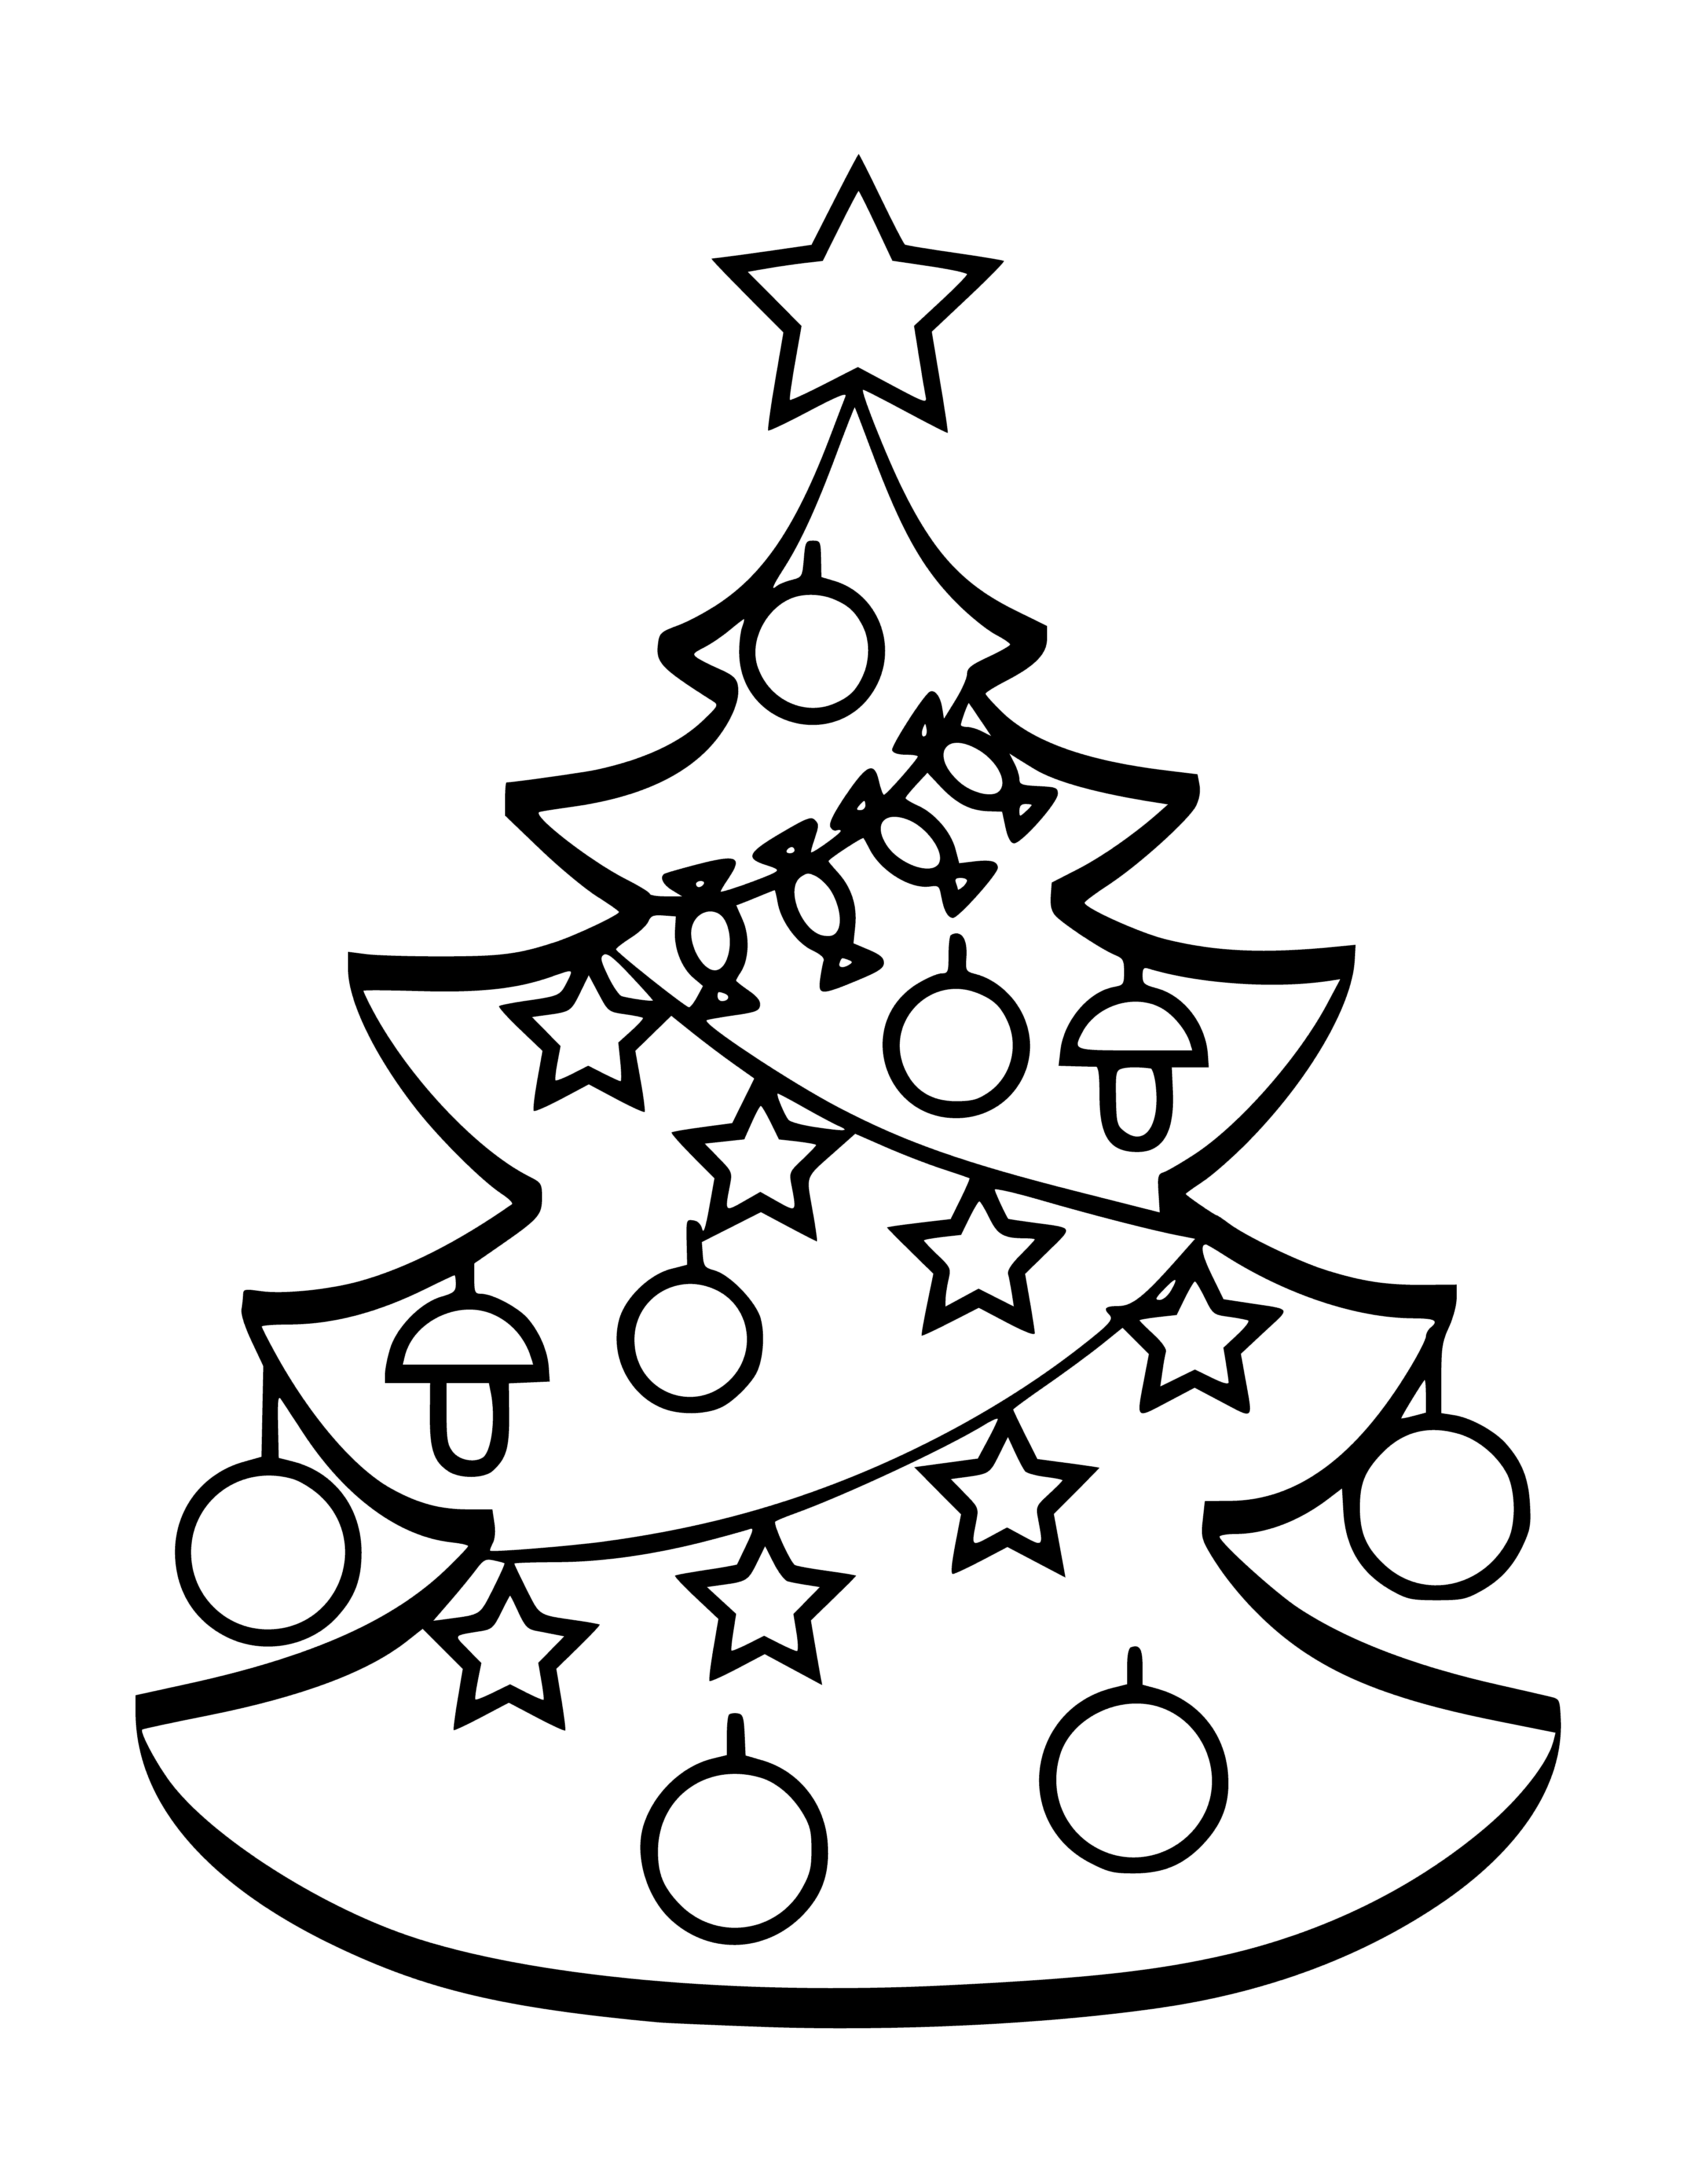 coloring page: Town sq. filled with festive atmosphere as giant Christmas tree has garlands, lights, red bows decor and small train around base. Presents & people milling.